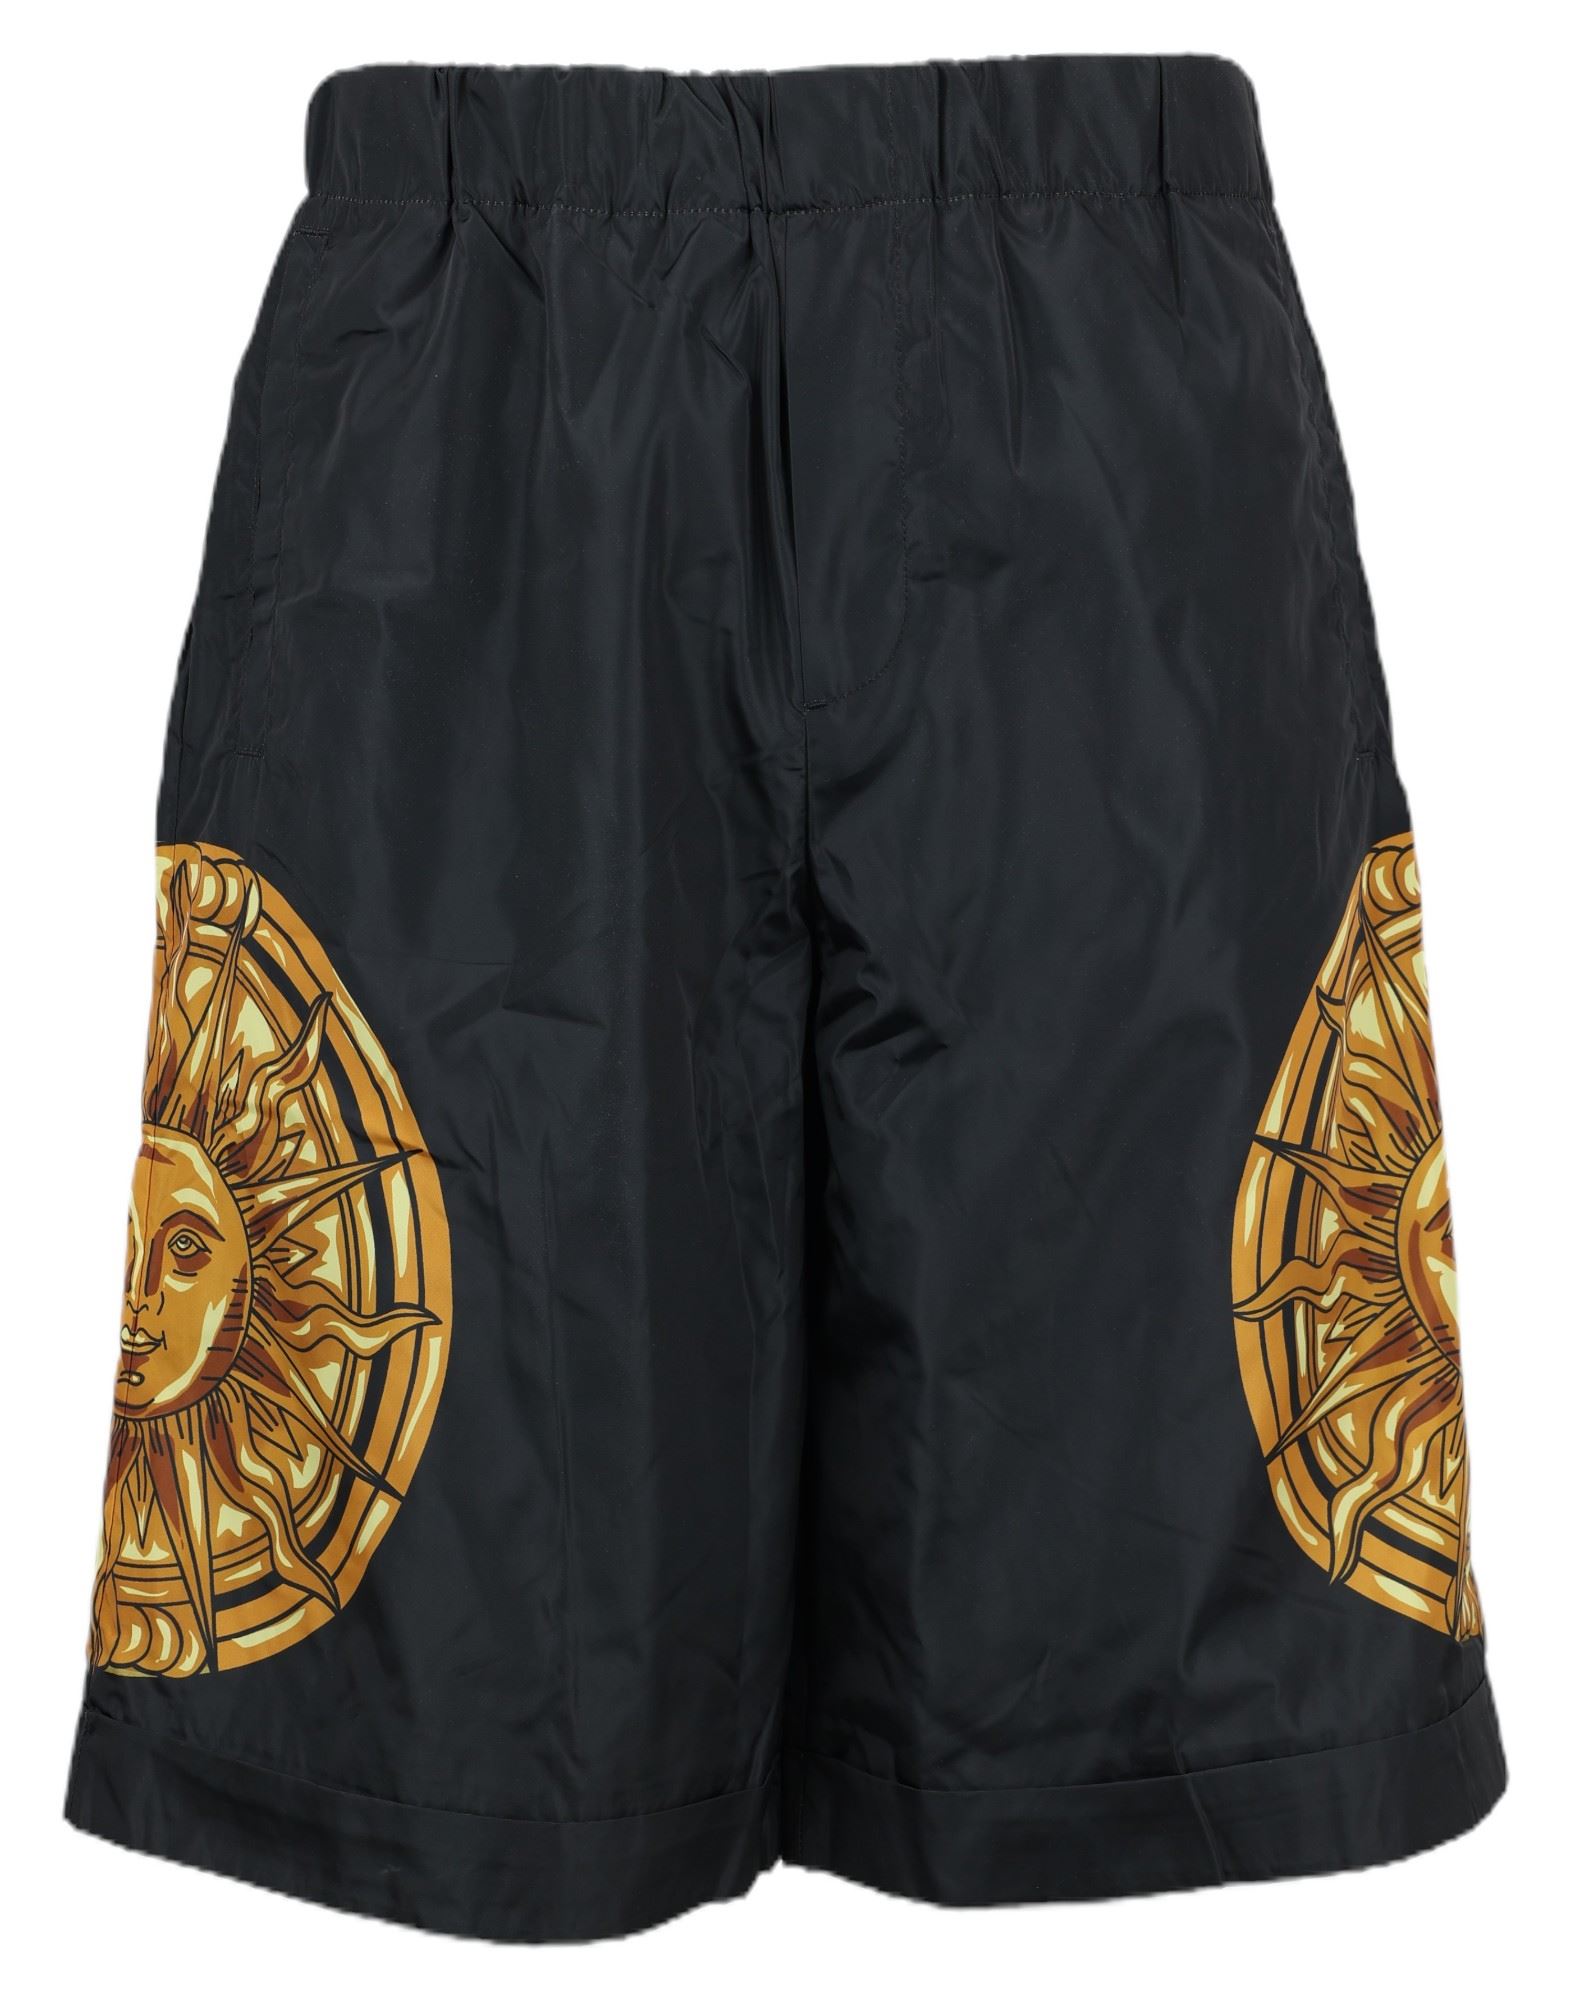 VERSACE JEANS COUTURE Shorts & Bermudashorts Herren Schwarz von VERSACE JEANS COUTURE